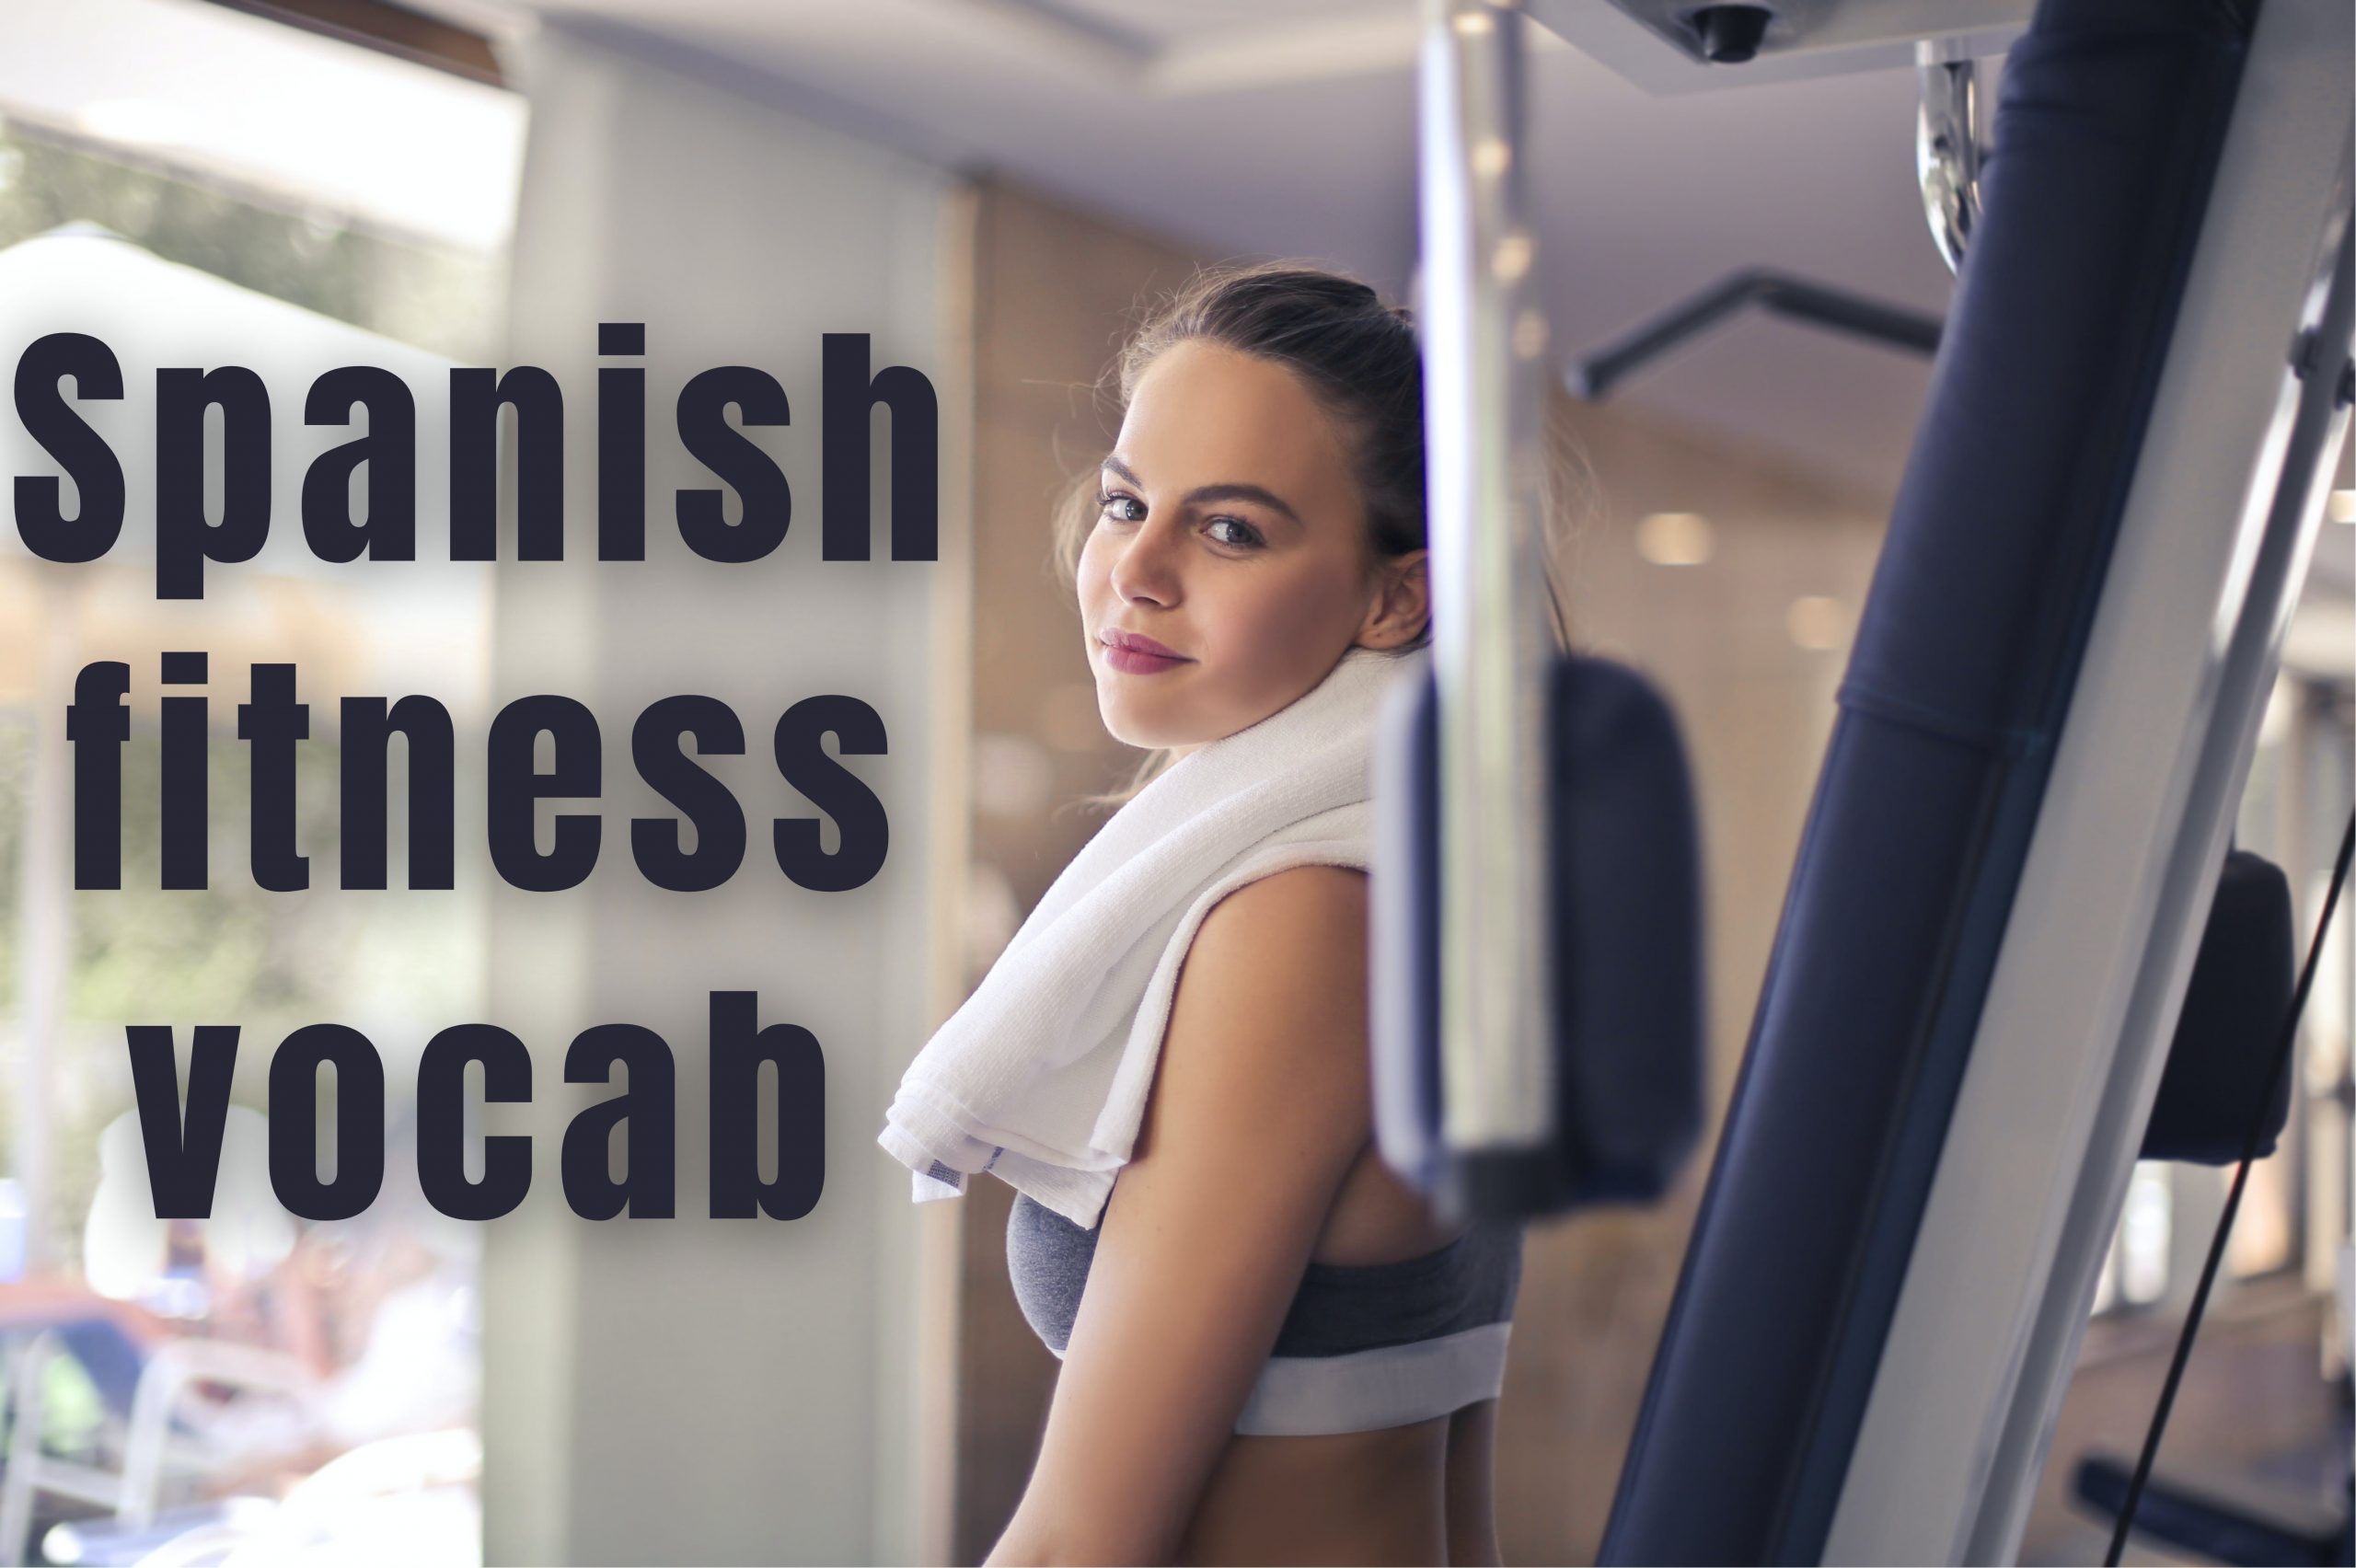 Let's learn all the Spanish fitness vocab for working out at the gym!